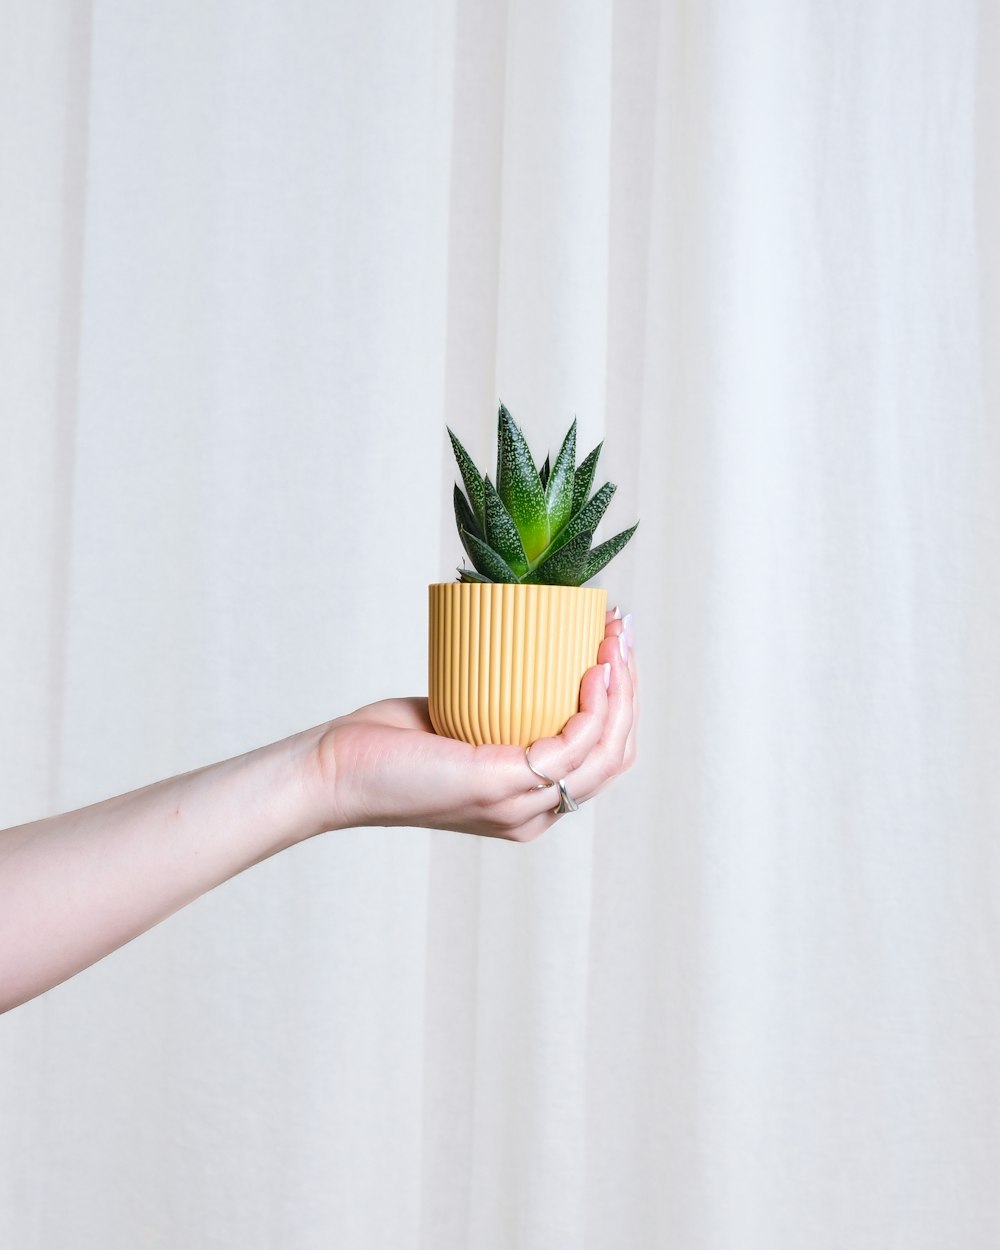 a person holding a potted plant in their hand